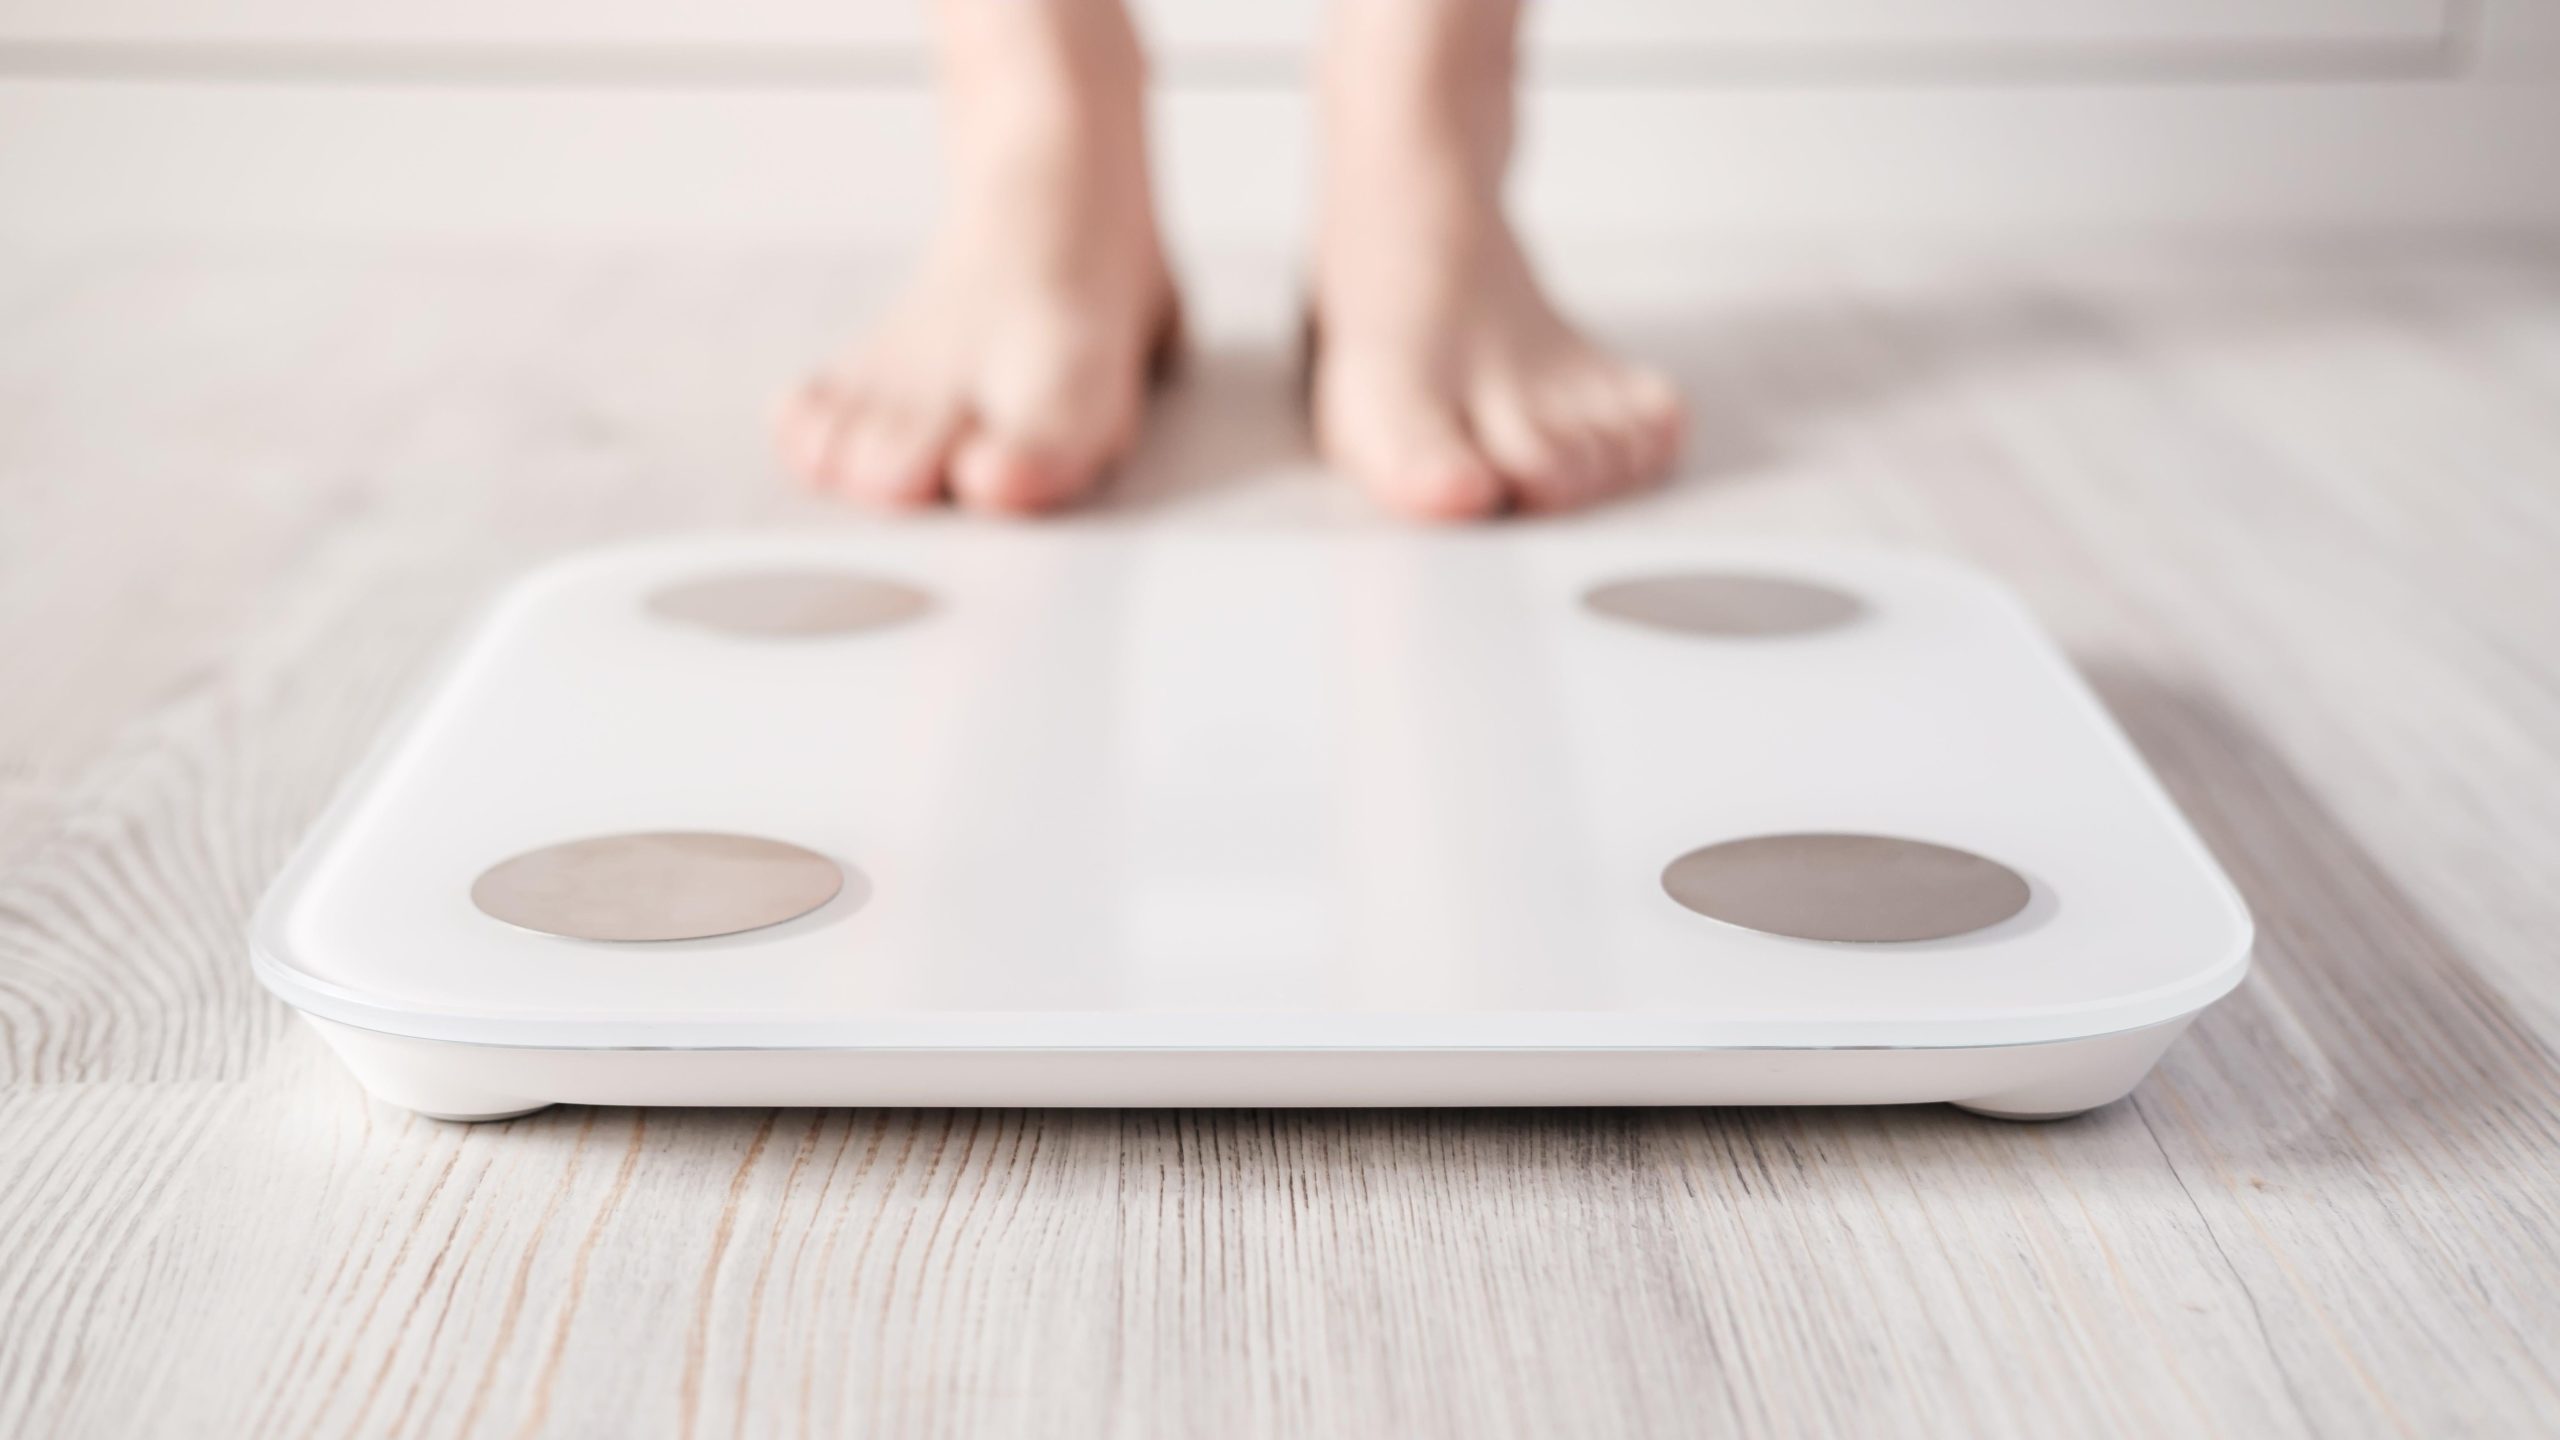 Your Smart Scale Probably Isn’t Accurate Enough to Be Useful